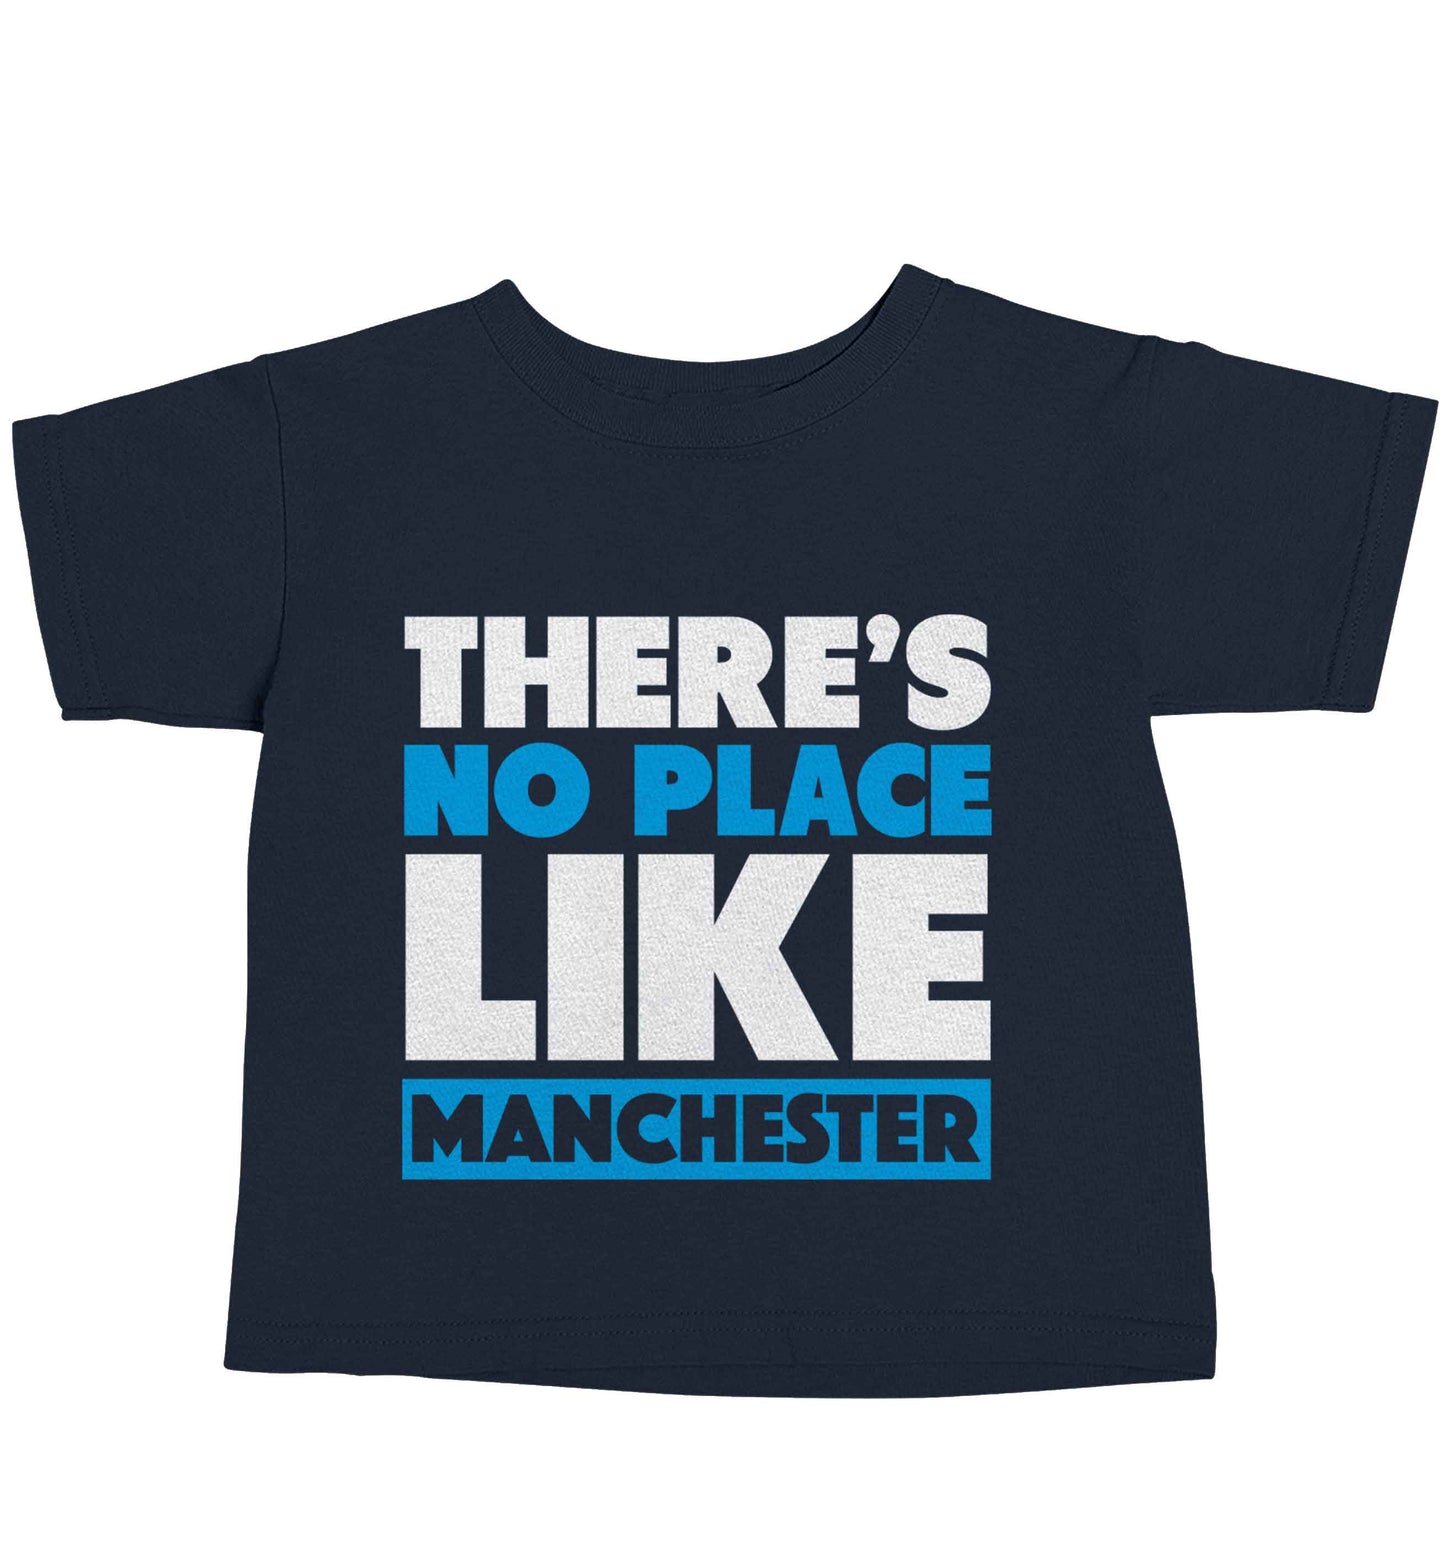 There's no place like Manchester navy baby toddler Tshirt 2 Years